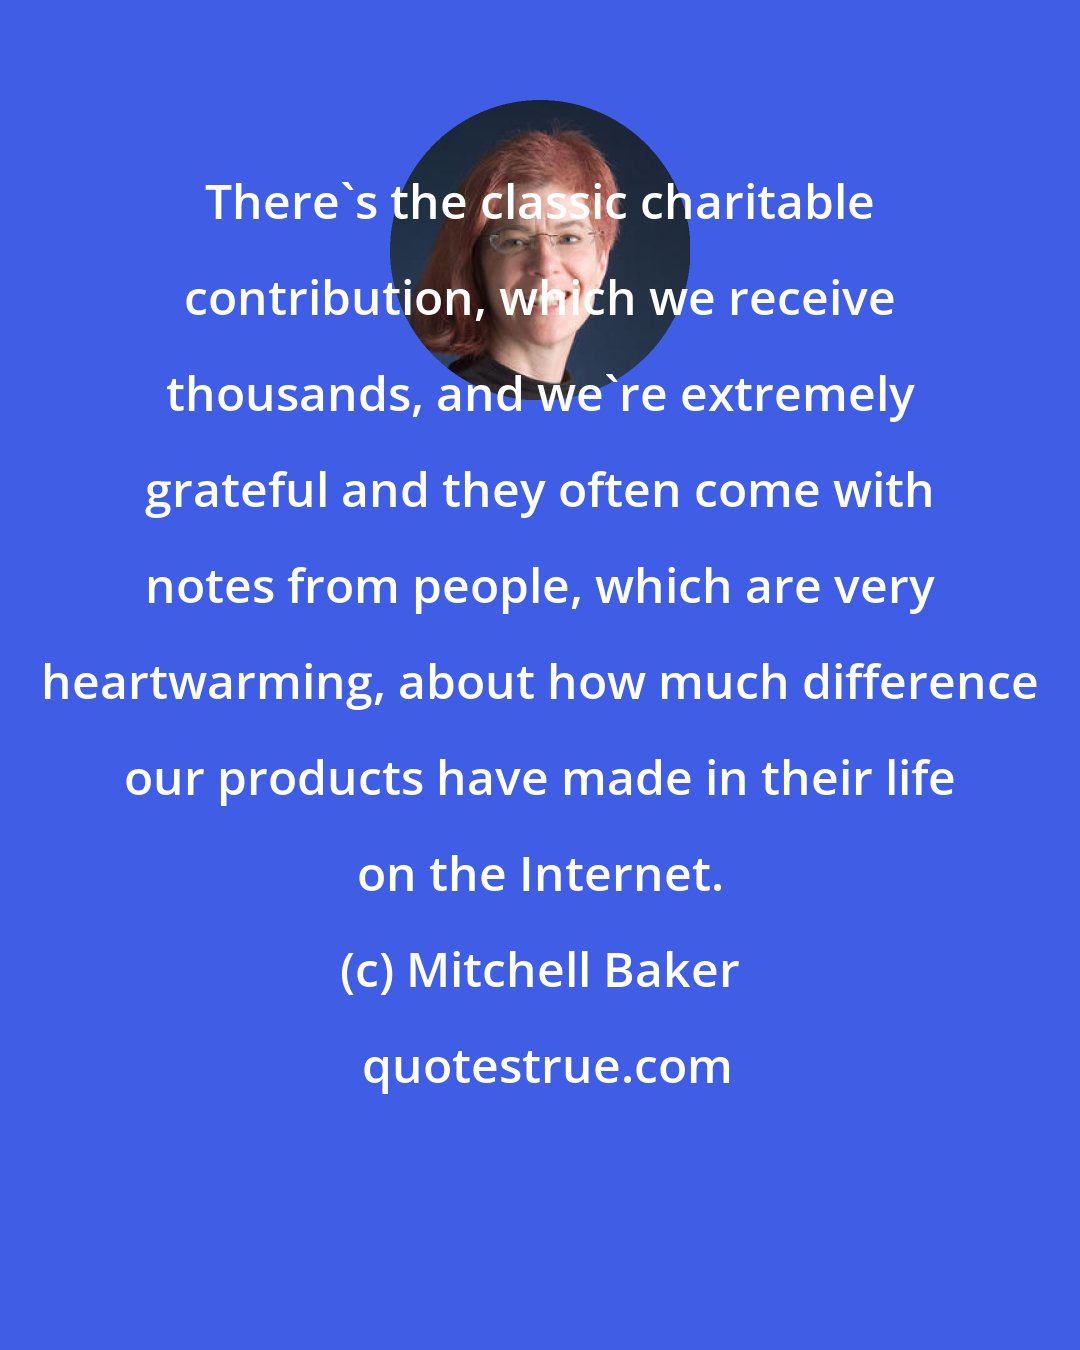 Mitchell Baker: There's the classic charitable contribution, which we receive thousands, and we're extremely grateful and they often come with notes from people, which are very heartwarming, about how much difference our products have made in their life on the Internet.